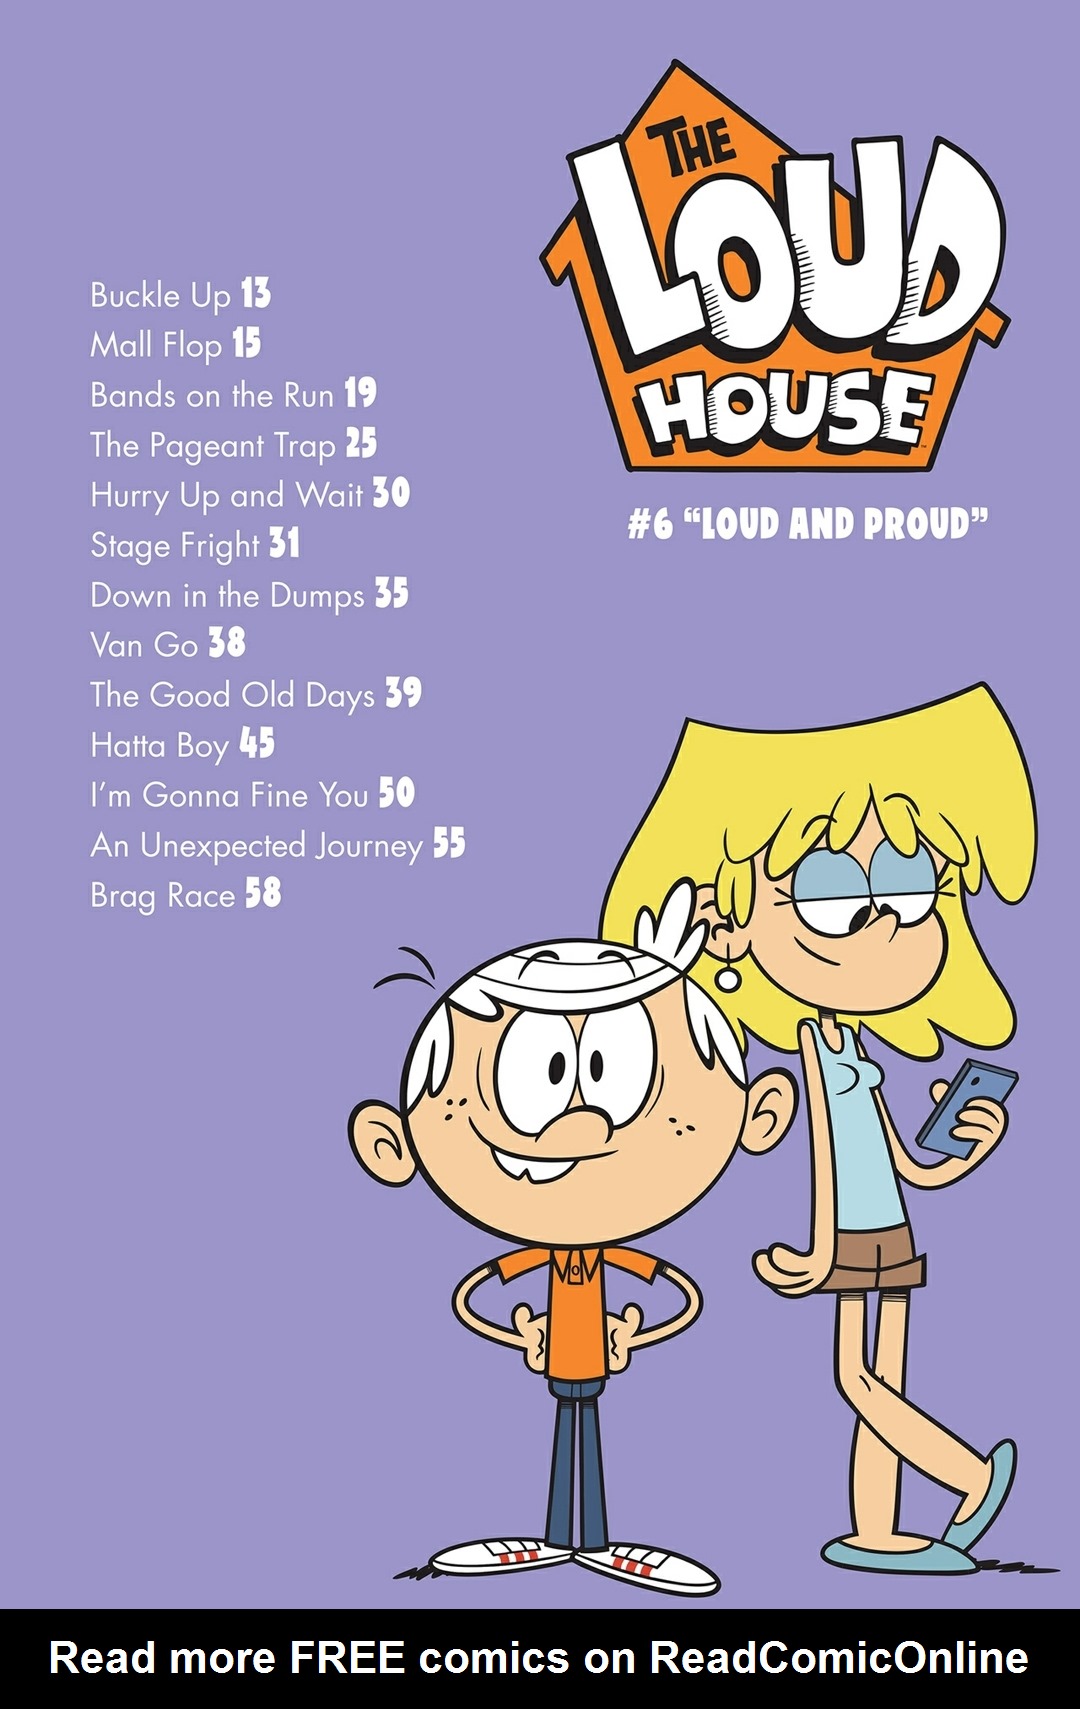 Read online The Loud House comic -  Issue #6 - 4